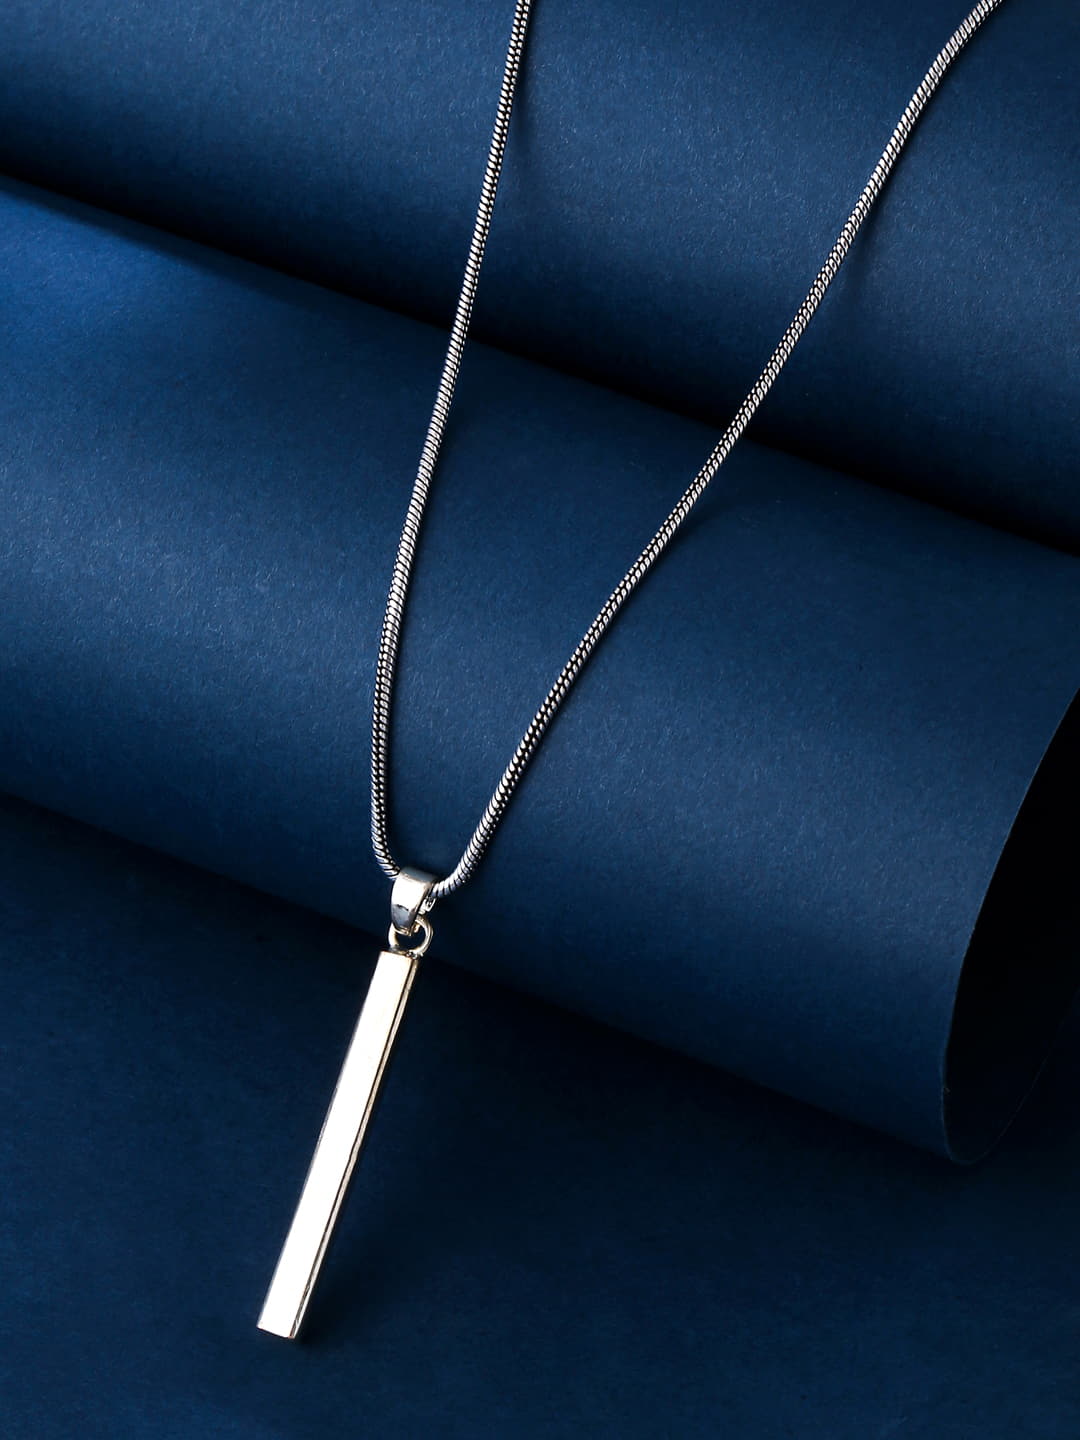 Silver Plated Bar Pendant with Chain for Men and Women